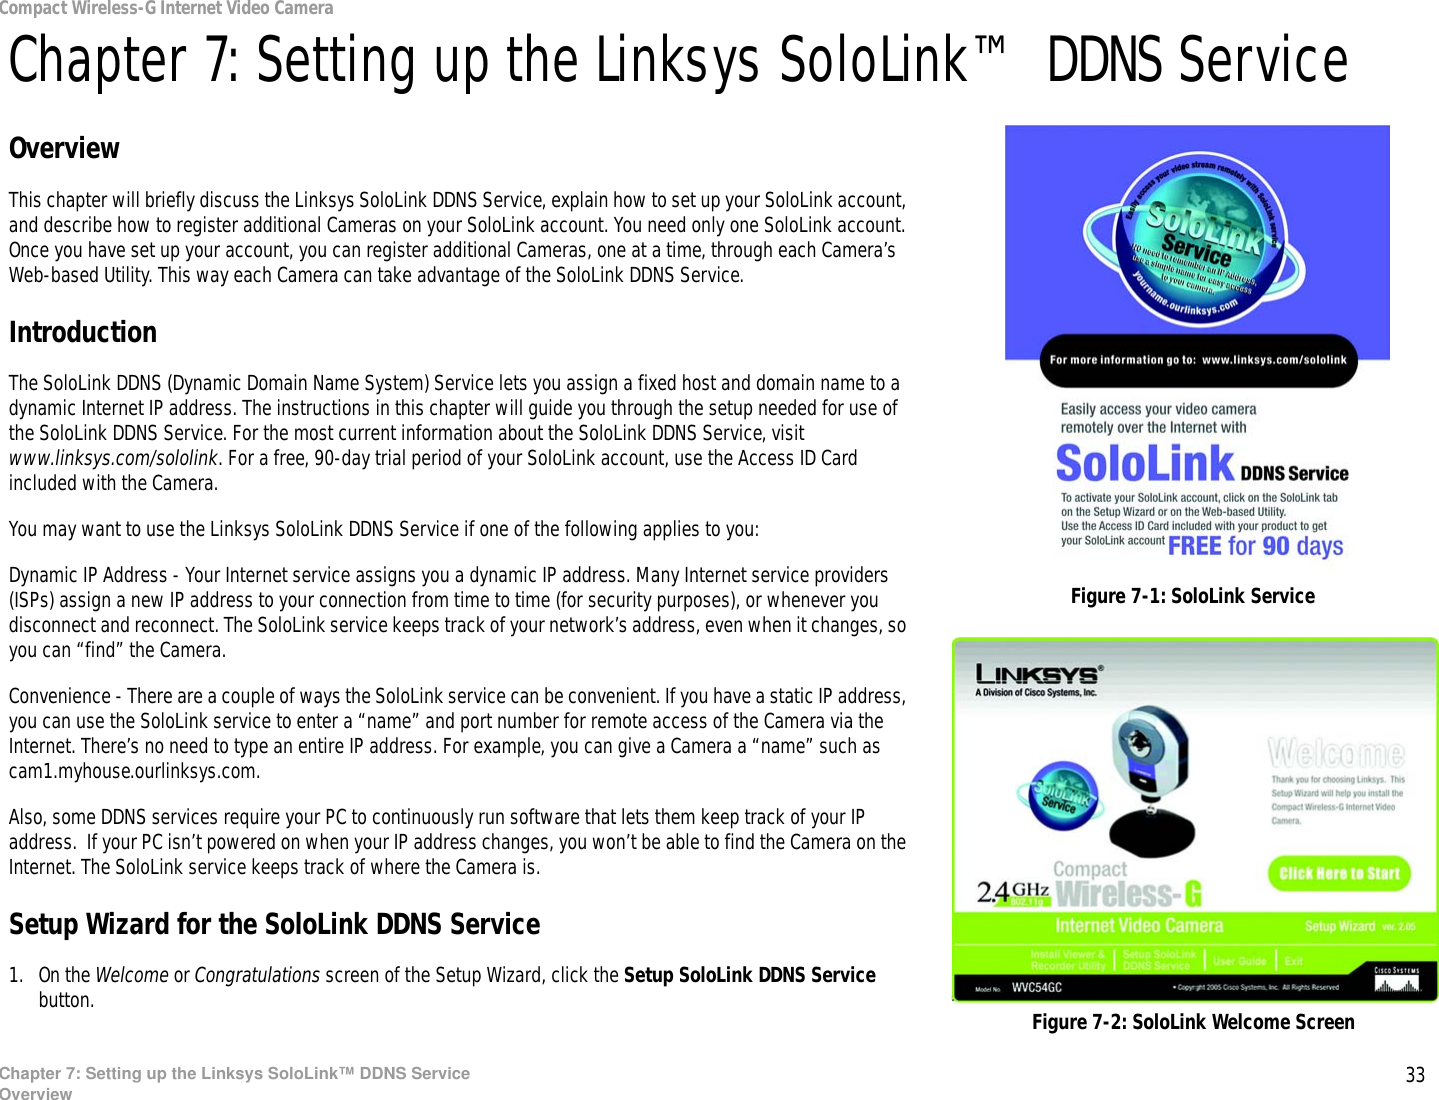 33Chapter 7: Setting up the Linksys SoloLink™ DDNS ServiceOverviewCompact Wireless-G Internet Video CameraChapter 7: Setting up the Linksys SoloLink™ DDNS ServiceOverviewThis chapter will briefly discuss the Linksys SoloLink DDNS Service, explain how to set up your SoloLink account, and describe how to register additional Cameras on your SoloLink account. You need only one SoloLink account. Once you have set up your account, you can register additional Cameras, one at a time, through each Camera’s Web-based Utility. This way each Camera can take advantage of the SoloLink DDNS Service.IntroductionThe SoloLink DDNS (Dynamic Domain Name System) Service lets you assign a fixed host and domain name to a dynamic Internet IP address. The instructions in this chapter will guide you through the setup needed for use of the SoloLink DDNS Service. For the most current information about the SoloLink DDNS Service, visit www.linksys.com/sololink. For a free, 90-day trial period of your SoloLink account, use the Access ID Card included with the Camera.You may want to use the Linksys SoloLink DDNS Service if one of the following applies to you:Dynamic IP Address - Your Internet service assigns you a dynamic IP address. Many Internet service providers (ISPs) assign a new IP address to your connection from time to time (for security purposes), or whenever you disconnect and reconnect. The SoloLink service keeps track of your network’s address, even when it changes, so you can “find” the Camera.Convenience - There are a couple of ways the SoloLink service can be convenient. If you have a static IP address, you can use the SoloLink service to enter a “name” and port number for remote access of the Camera via the Internet. There’s no need to type an entire IP address. For example, you can give a Camera a “name” such as cam1.myhouse.ourlinksys.com.Also, some DDNS services require your PC to continuously run software that lets them keep track of your IP address.  If your PC isn’t powered on when your IP address changes, you won’t be able to find the Camera on the Internet. The SoloLink service keeps track of where the Camera is.Setup Wizard for the SoloLink DDNS Service1. On the Welcome or Congratulations screen of the Setup Wizard, click the Setup SoloLink DDNS Service button.  Figure 7-2: SoloLink Welcome ScreenFigure 7-1: SoloLink Service